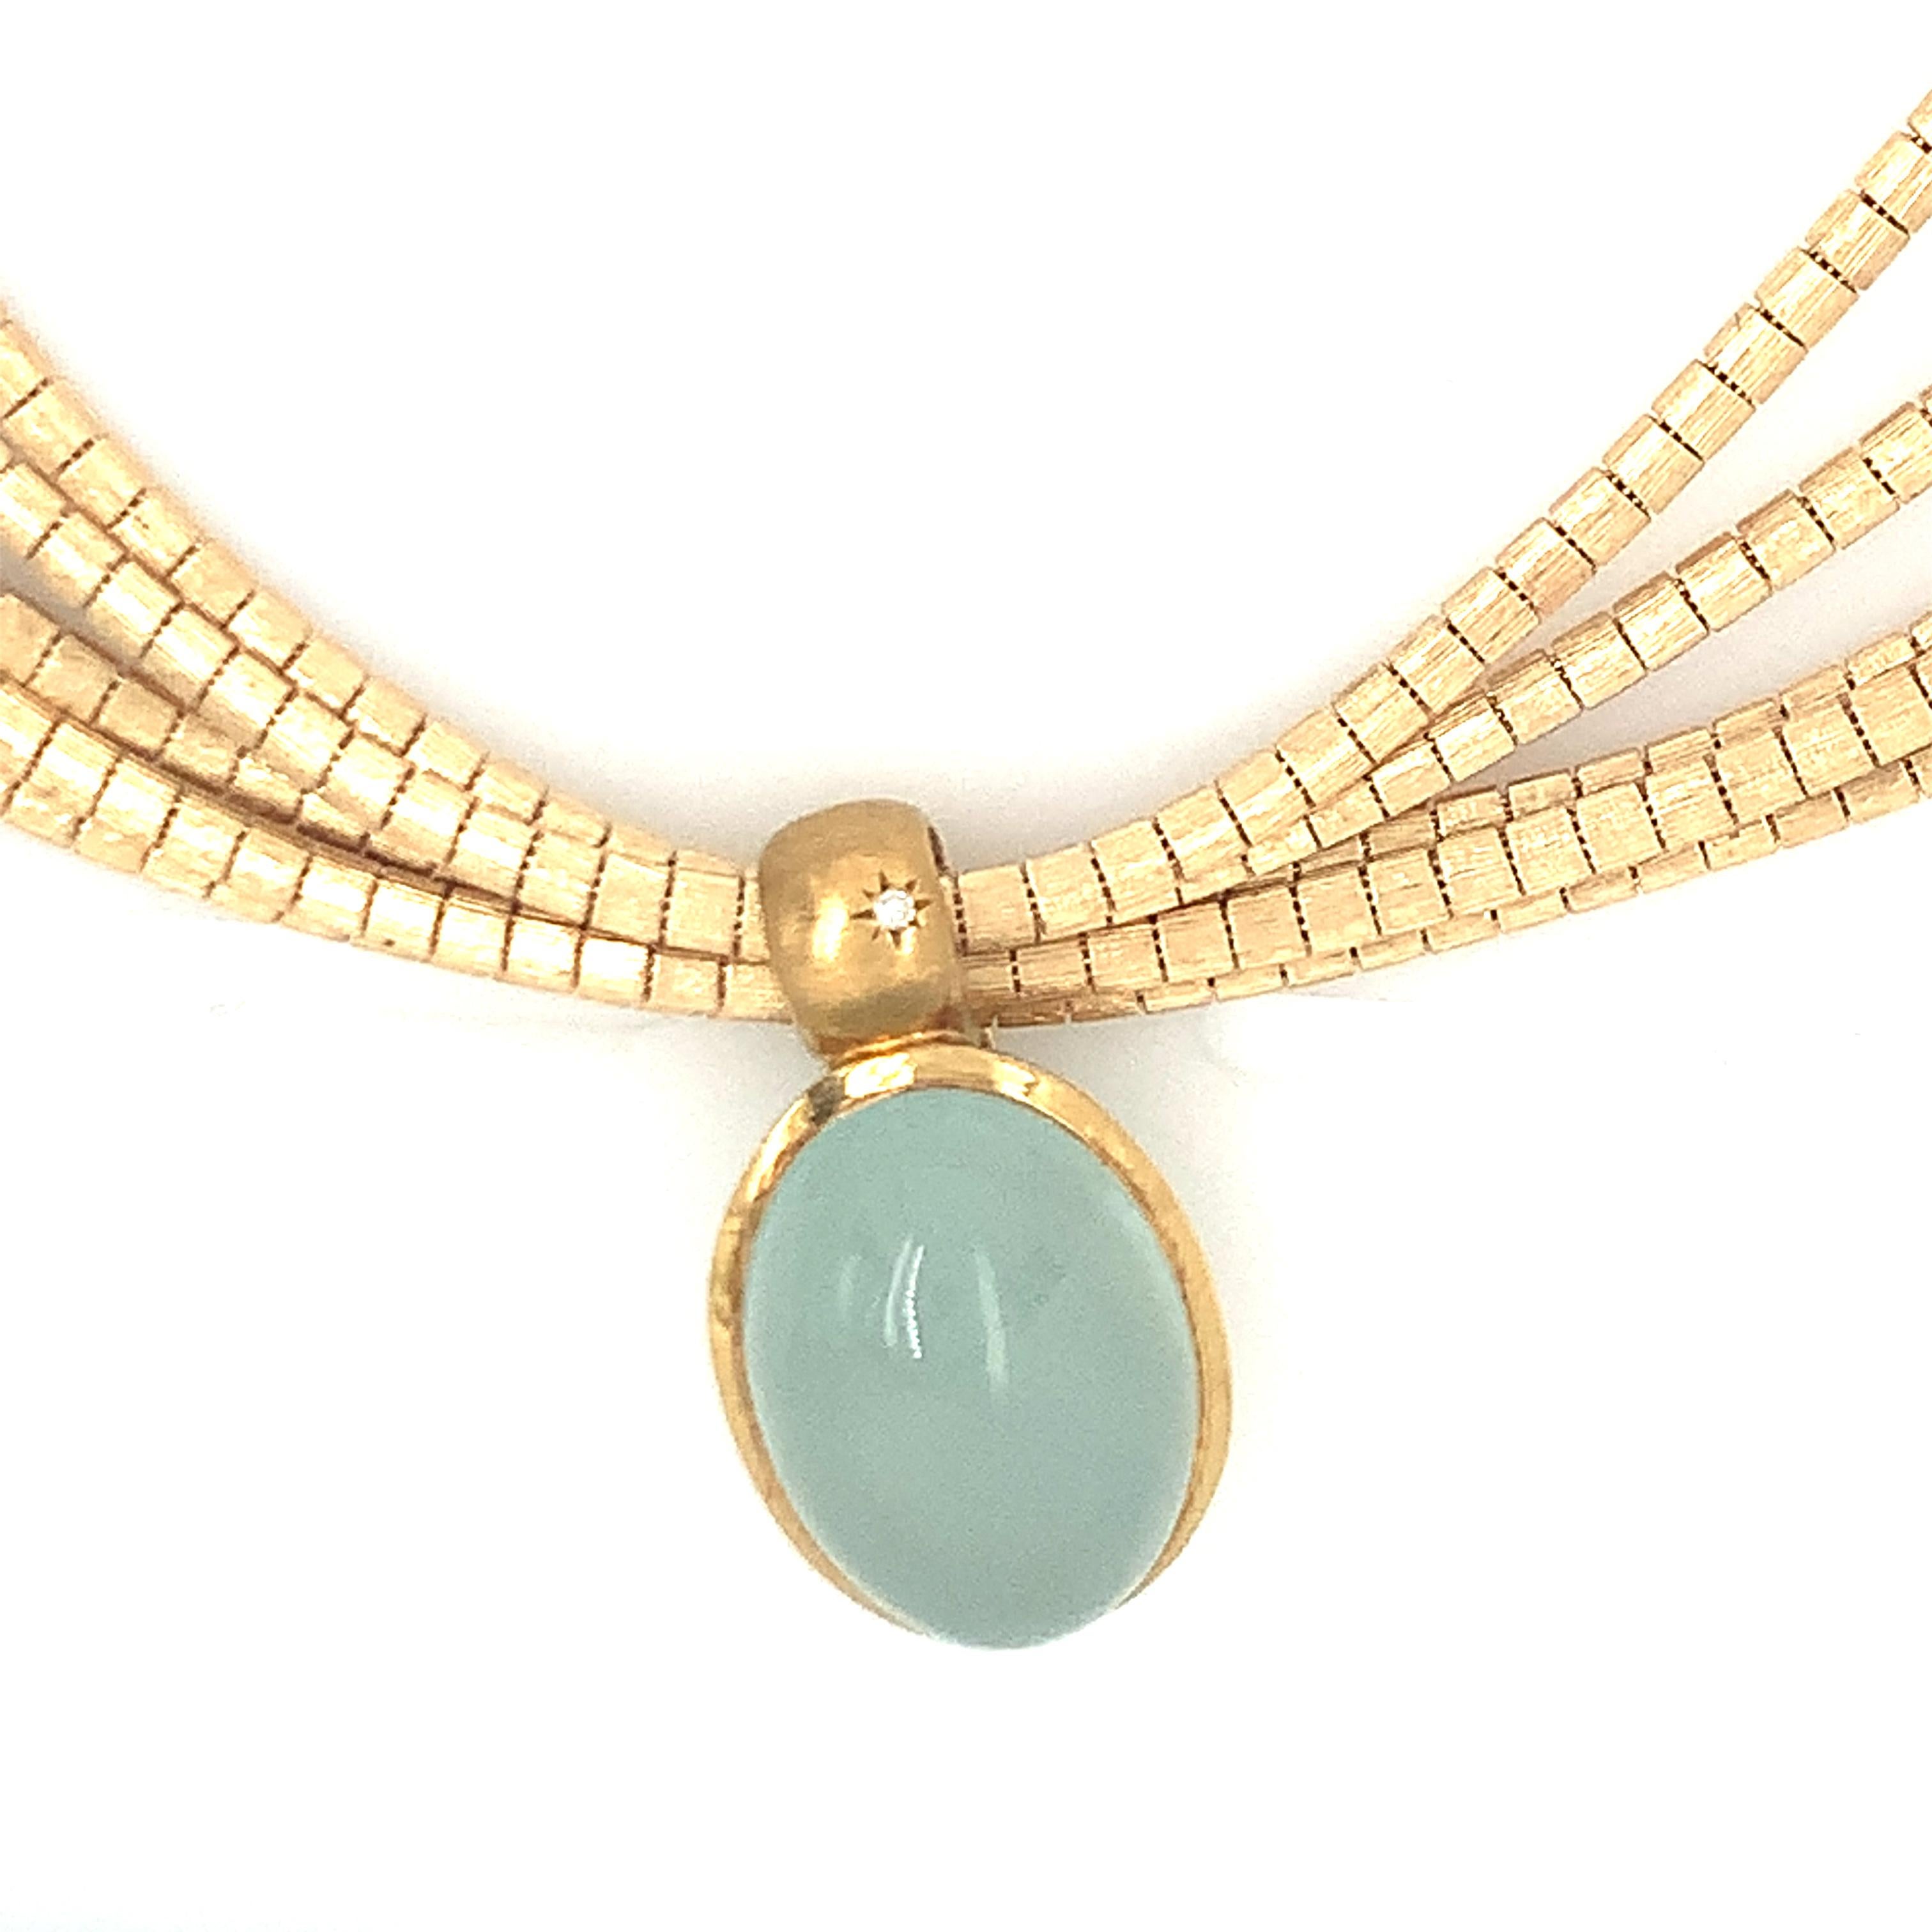 One aquamarine 18K yellow gold pendant / necklace featuring one oval sugarloaf cabochon aqua weighing 22 ct. with one star-set round brilliant cut diamond accent. Attached to a 14K yellow gold multi-strand, bamboo form link necklace measuring 22